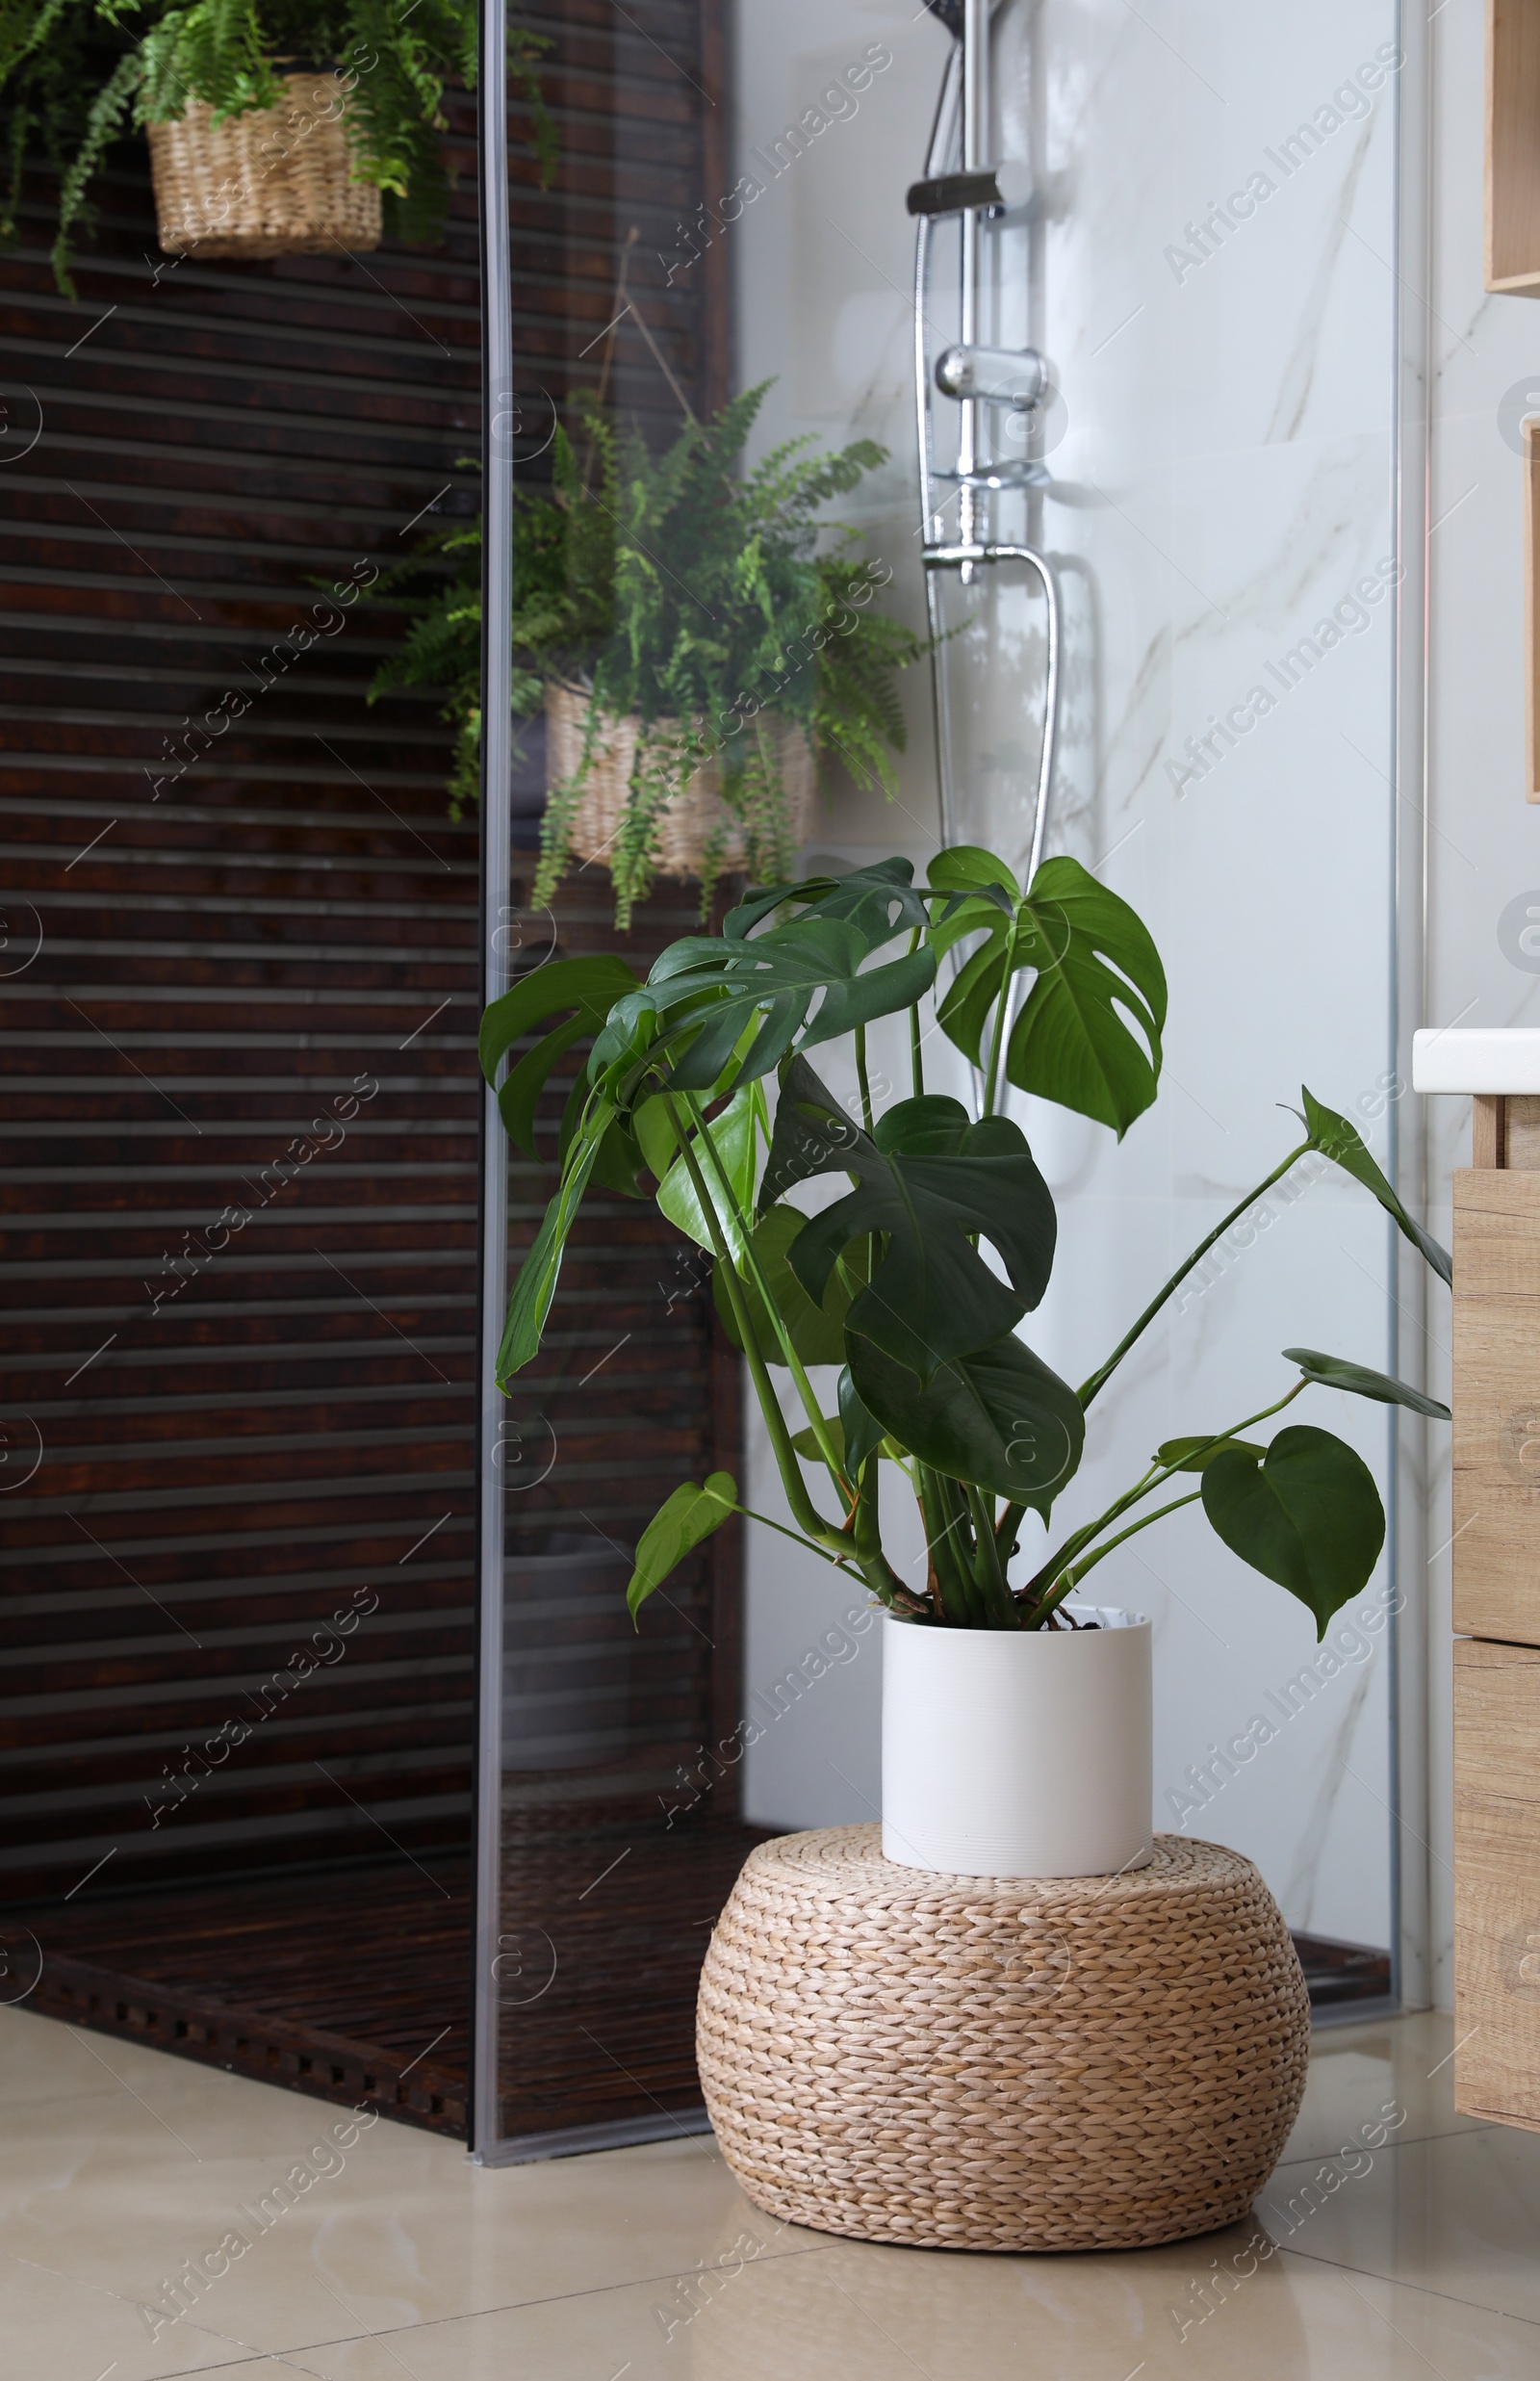 Photo of Beautiful houseplant on wicker pouf near shower stall in bathroom interior. Idea for design